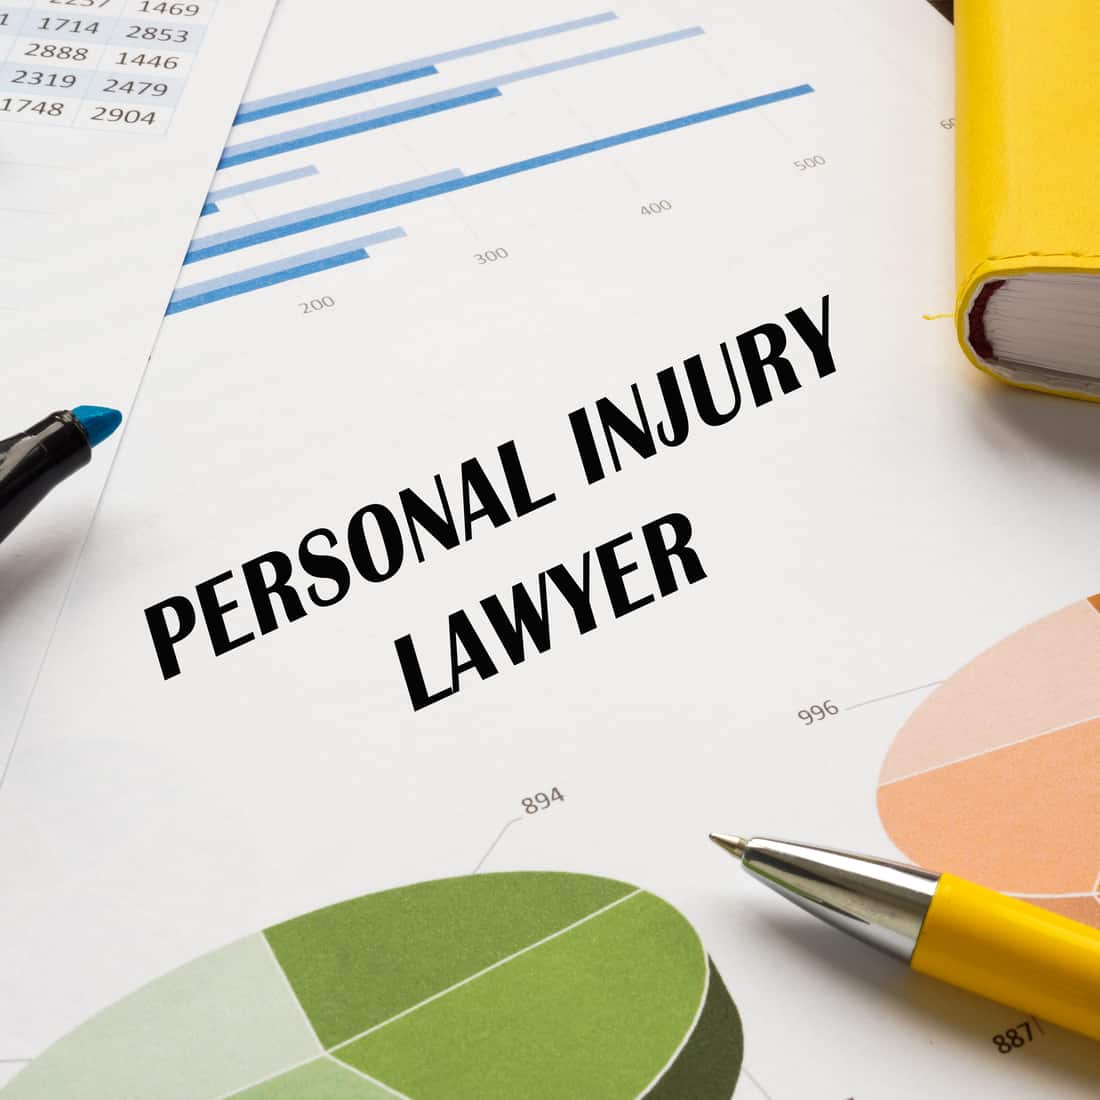 Personal Injury Lawyer at Rossville, MD